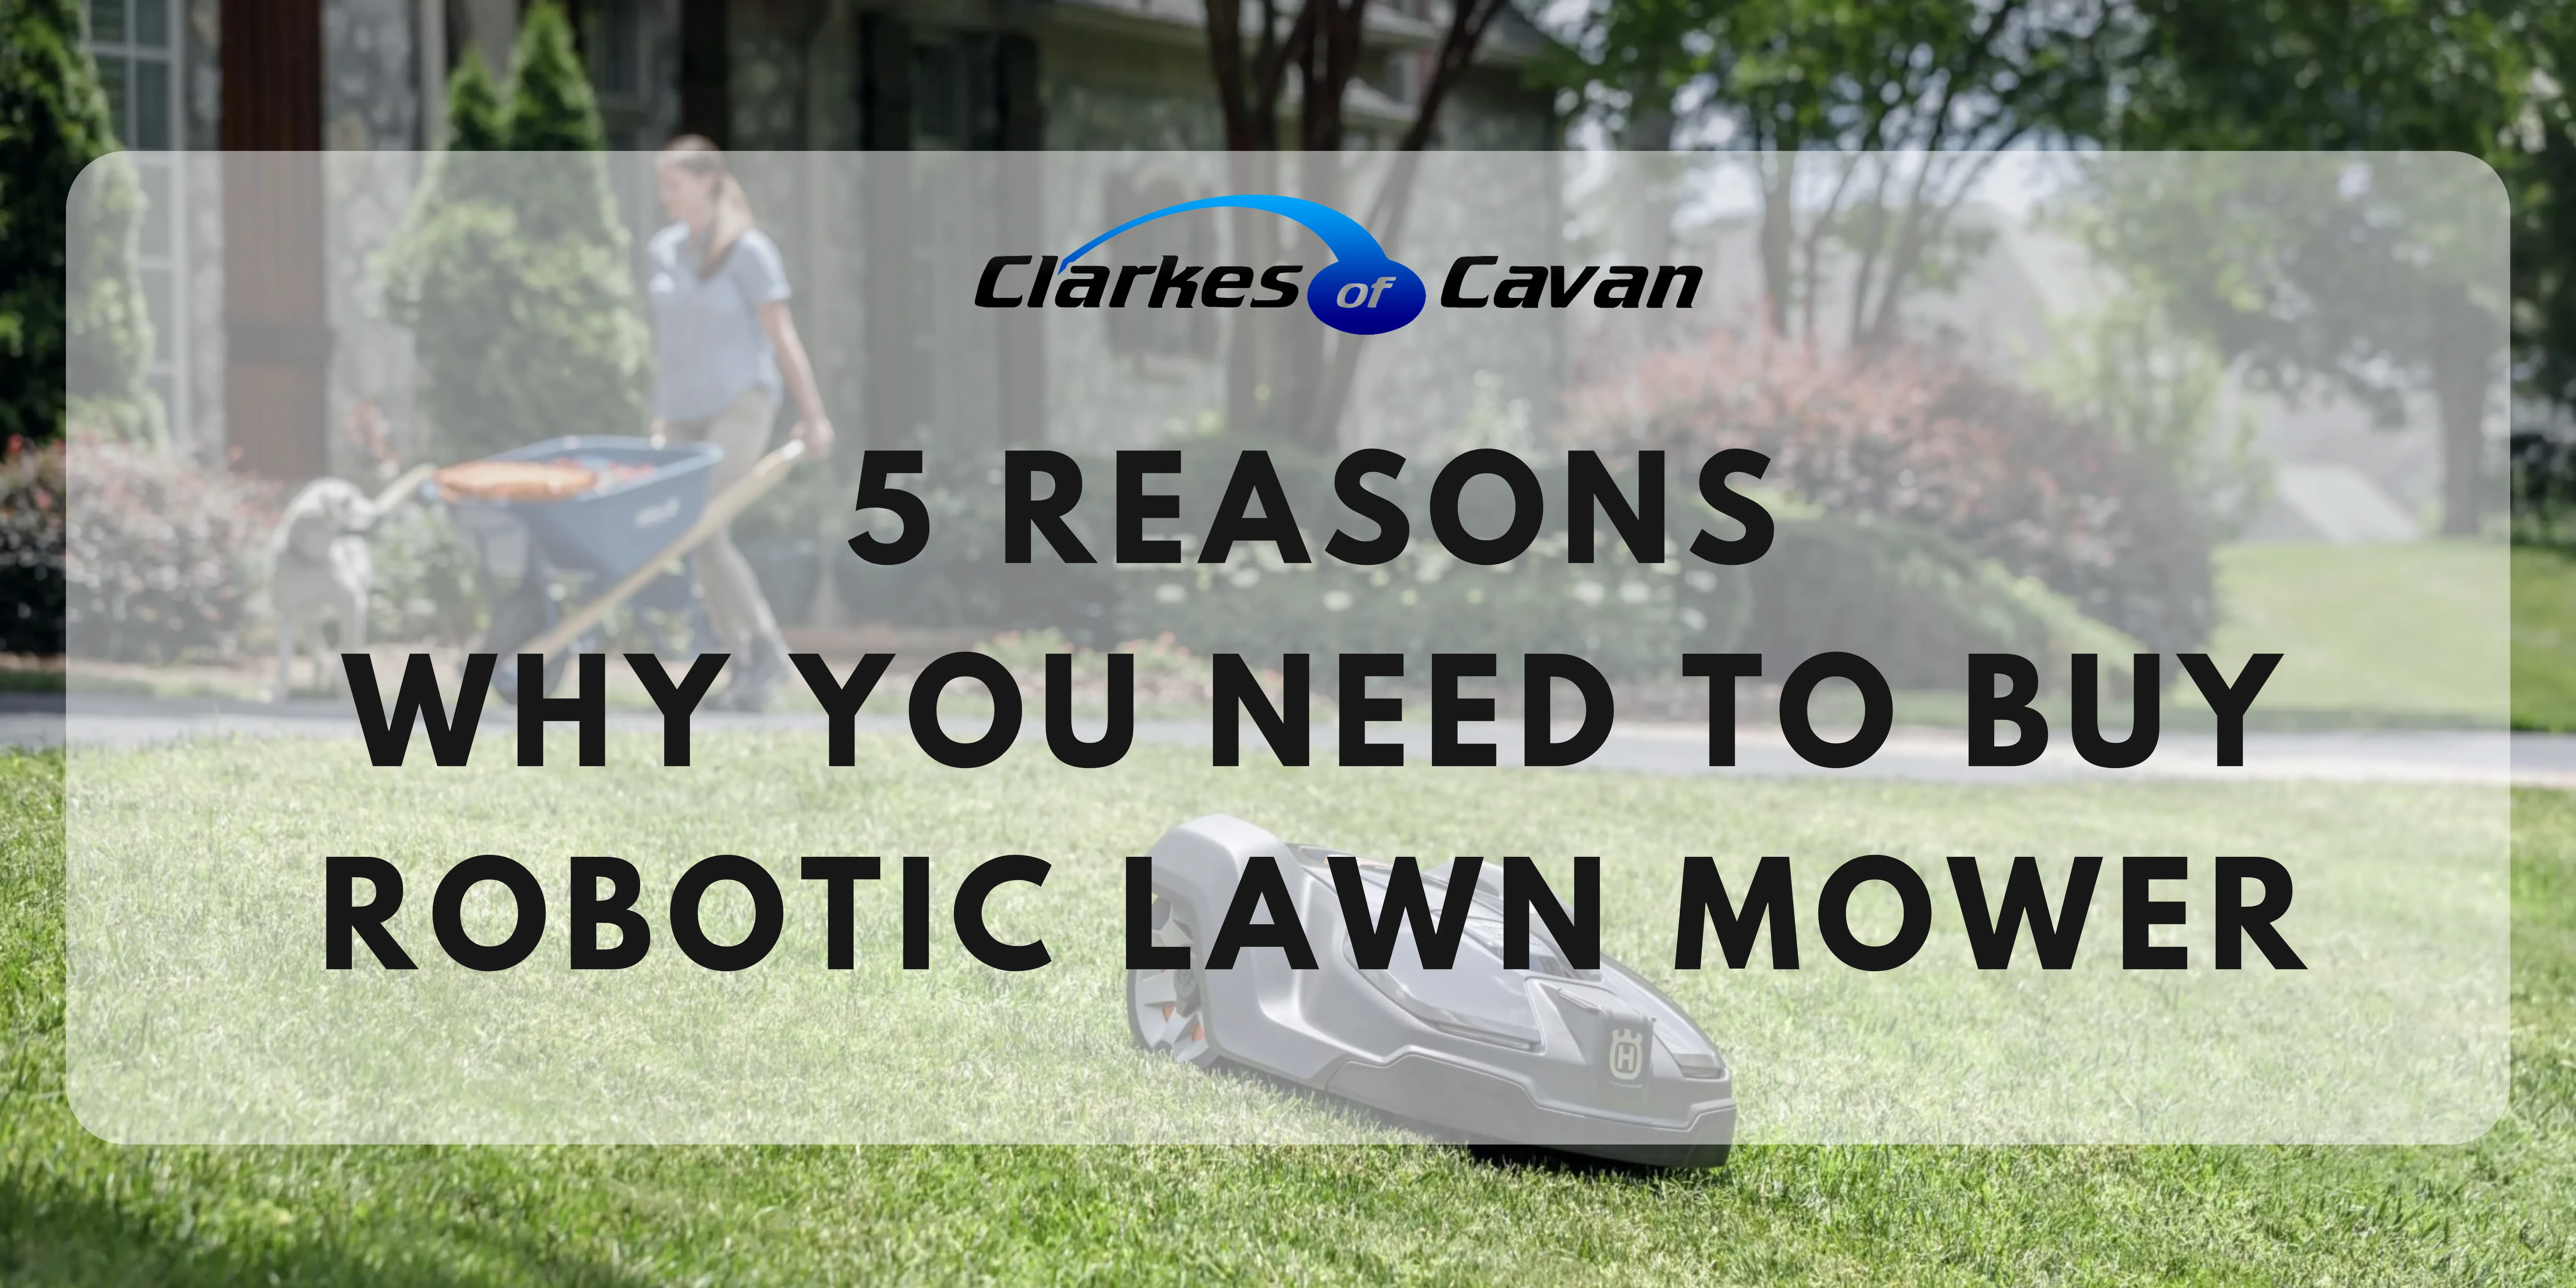 5 Reasons Why You Need to Buy Robotic Lawn Mower